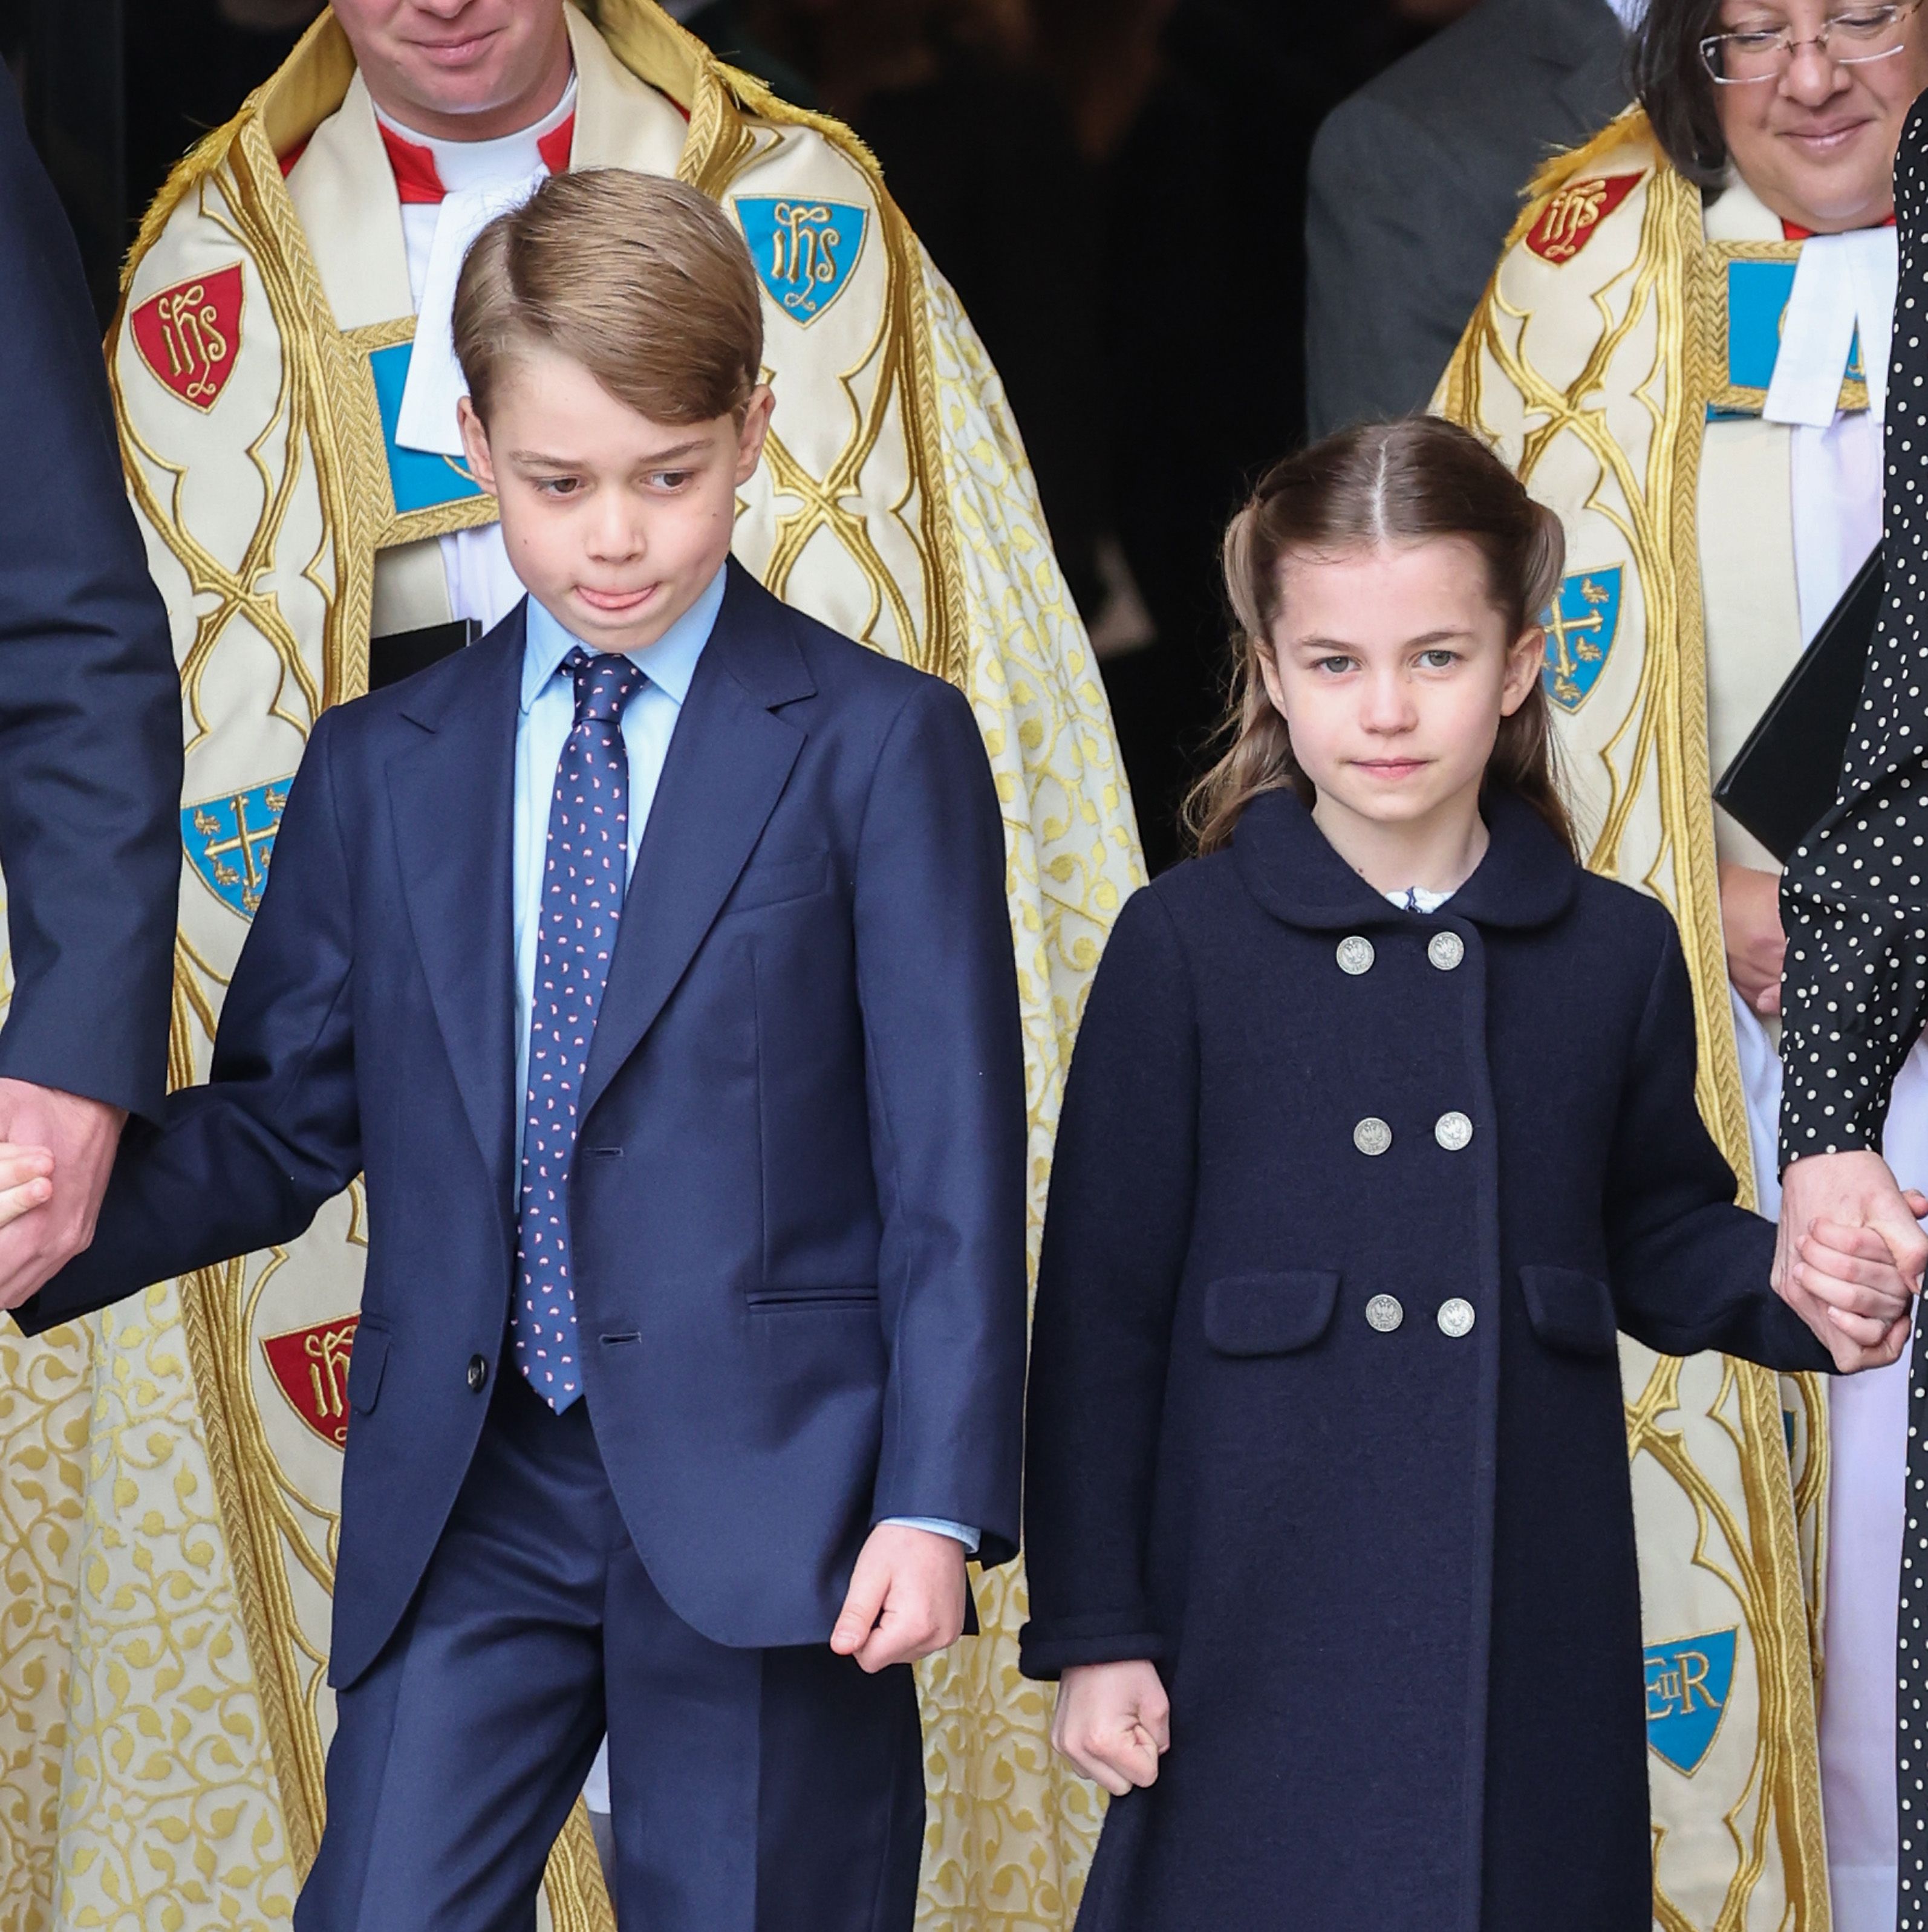 Prince George and Princess Charlotte Have New Last Names, and It's All Kinds of Complicated